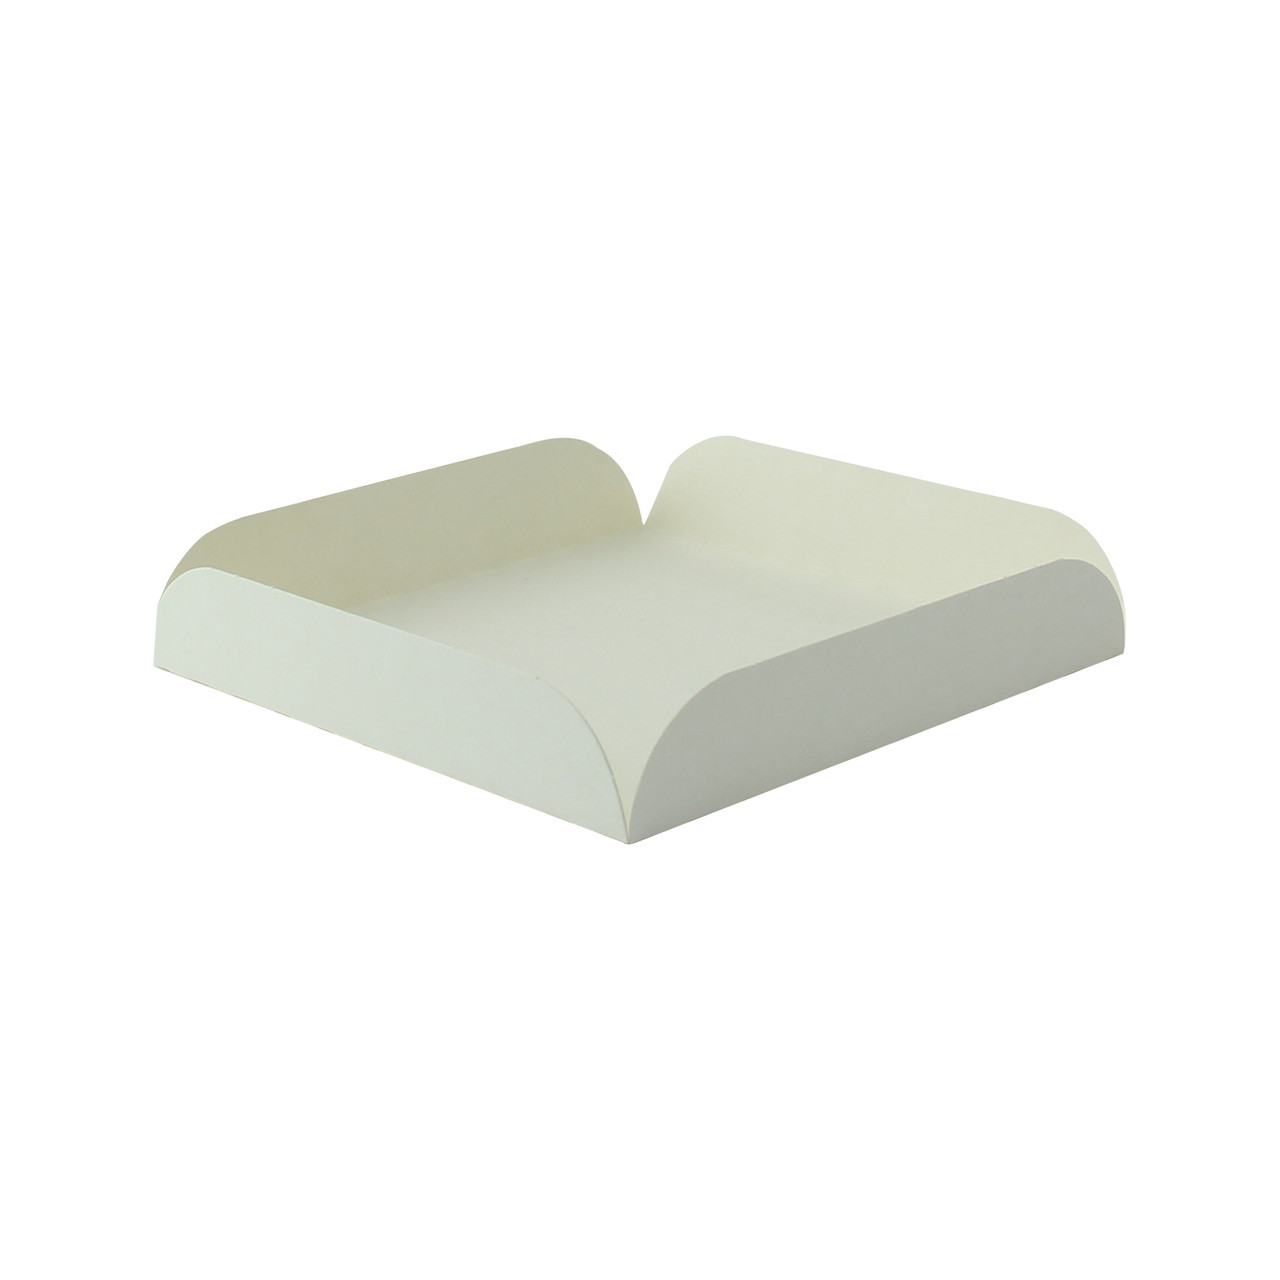 White Square Tray with Foldable Edges L:4.33in W:4.33in H:0.79in - 250 pcs